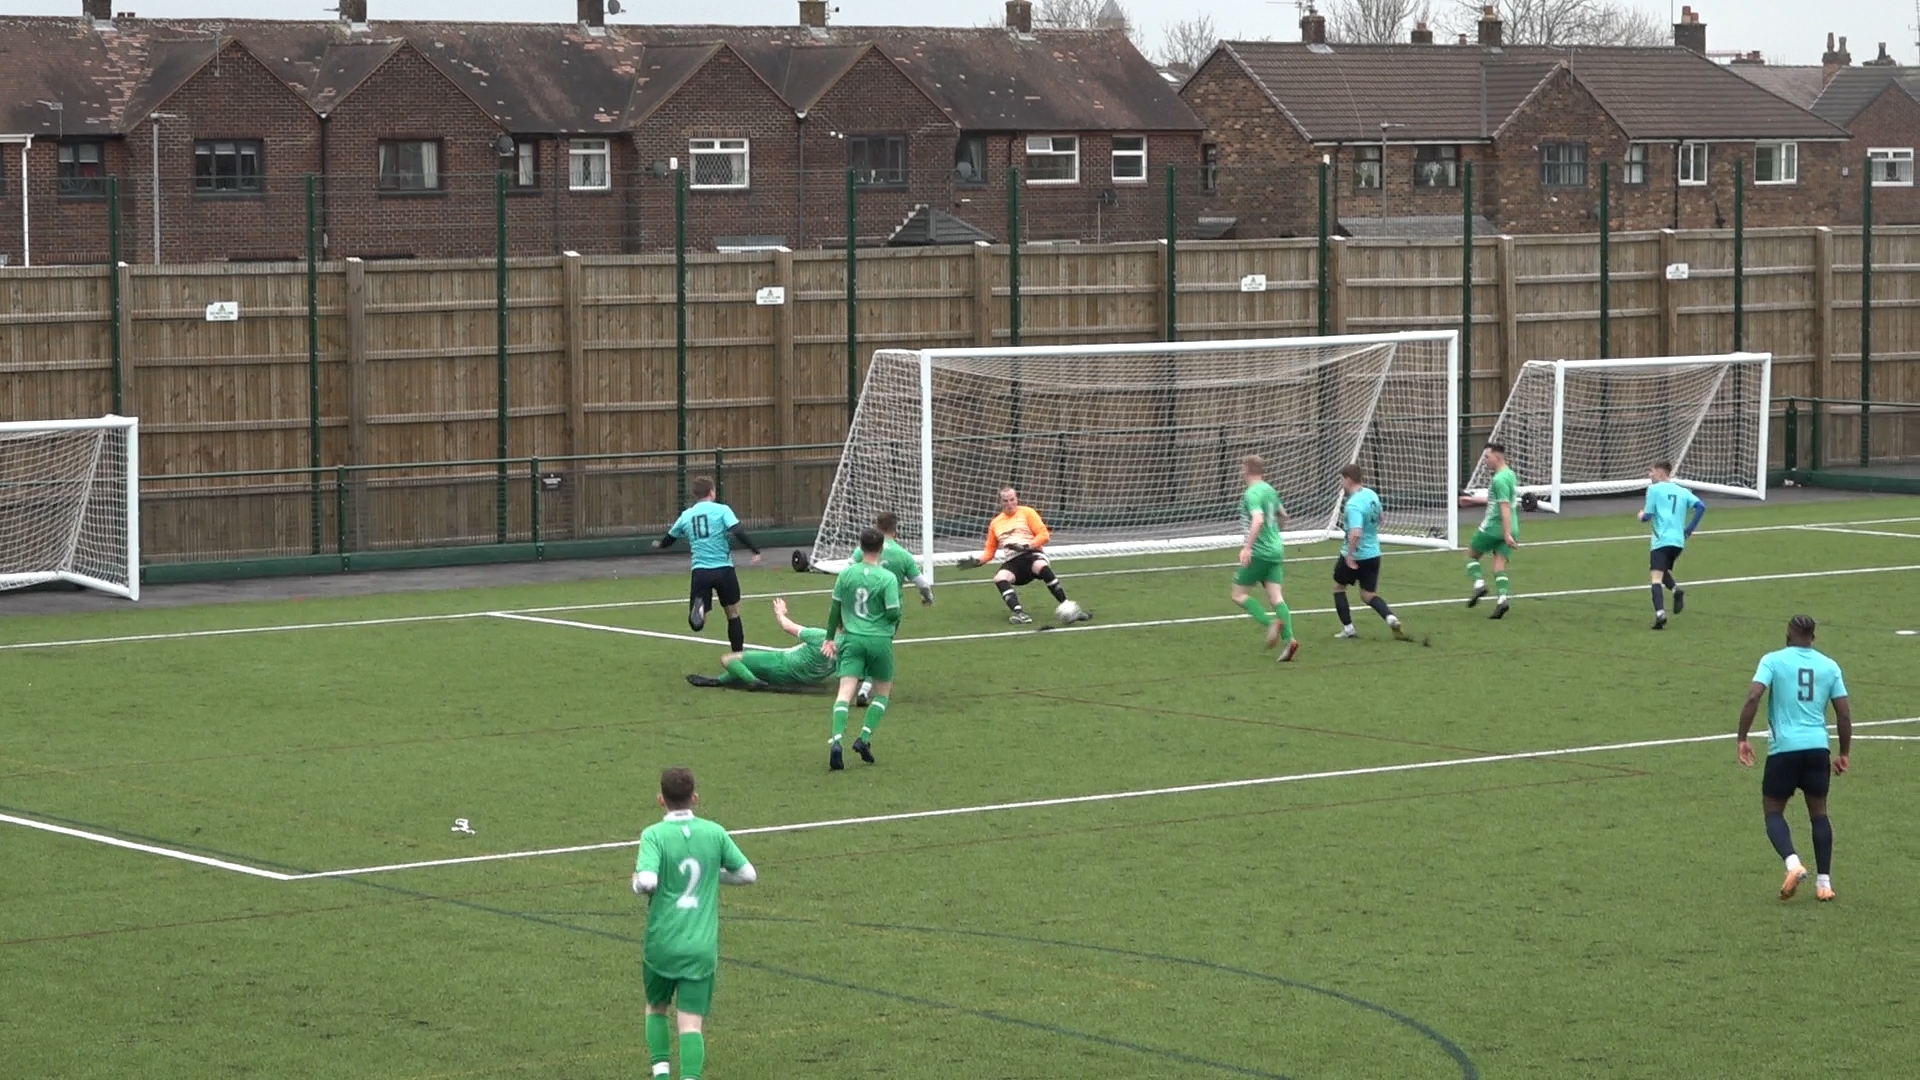 Whitworth Valley goalkeeper makes a save with his feet to deny Winstanley St Aidans